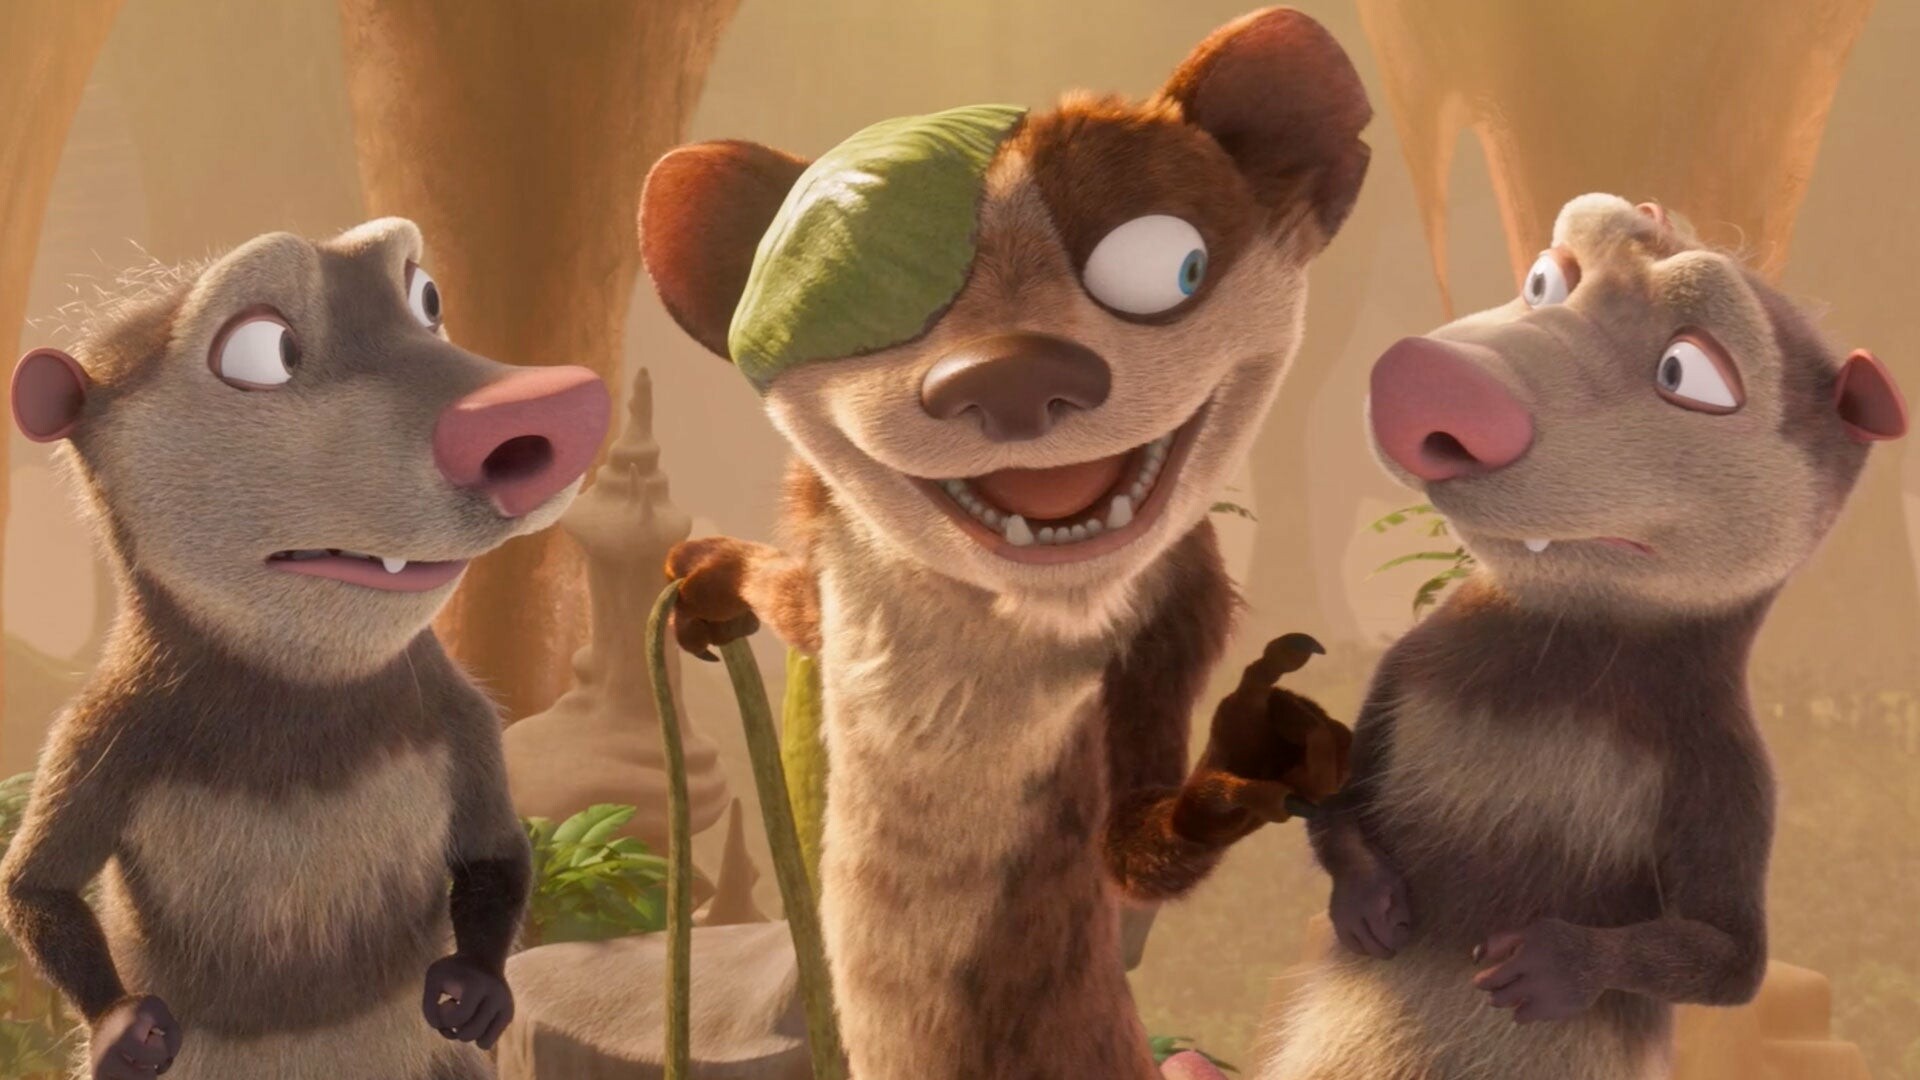 Ice Age: Adventures of Buck Wild: Crash and Eddie, Two twin opossum brothers that both first appeared in The Meltdown. 1920x1080 Full HD Background.